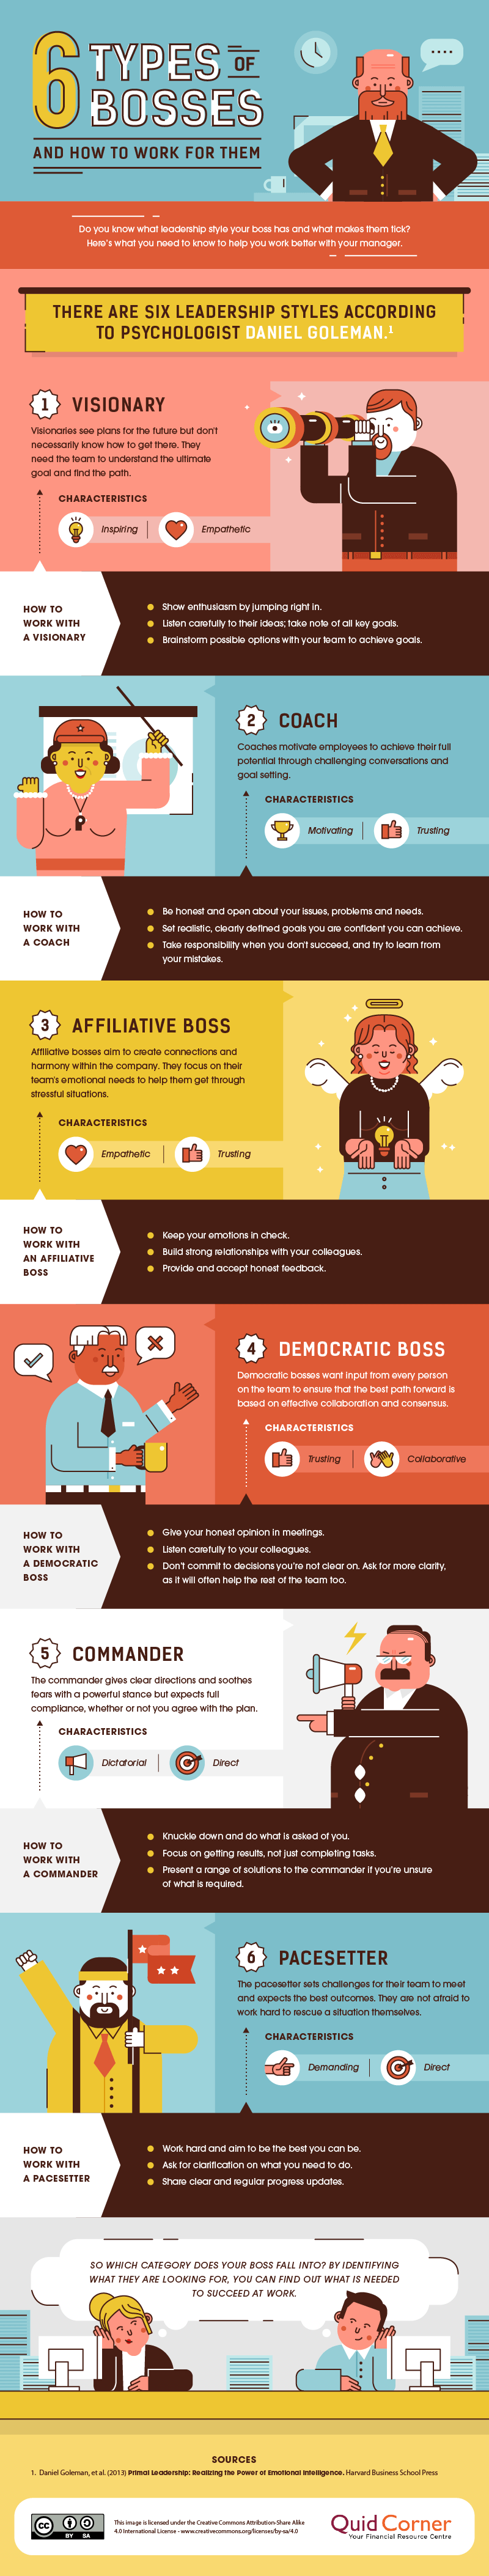 6 Types of Bosses (And How to Work for Them) Infographic